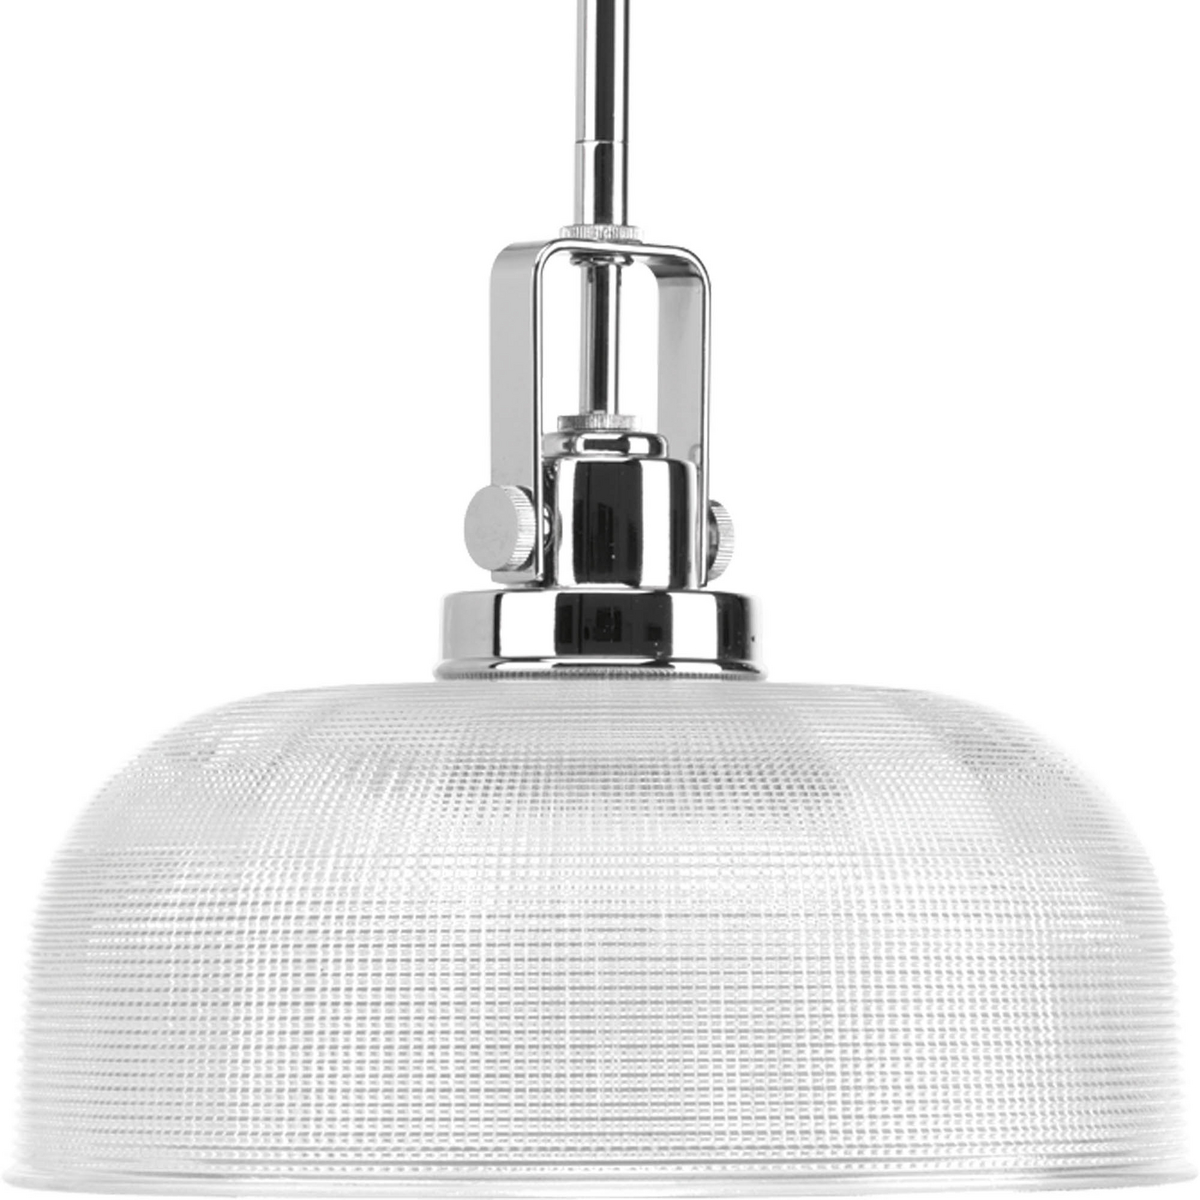 The Archie Collection brings a vintage, industrial flair to interior settings. The collection�s distinctive double prismatic glass adds visual interest as its crisscross pattern comes to life when illuminated. The distinctive finely crafted strap and knob detail adds authentic industrial flair. This one-light pendant is perfect for kitchens, dining rooms, rec room and anywhere pendants could be used. Polished Chrome finish.